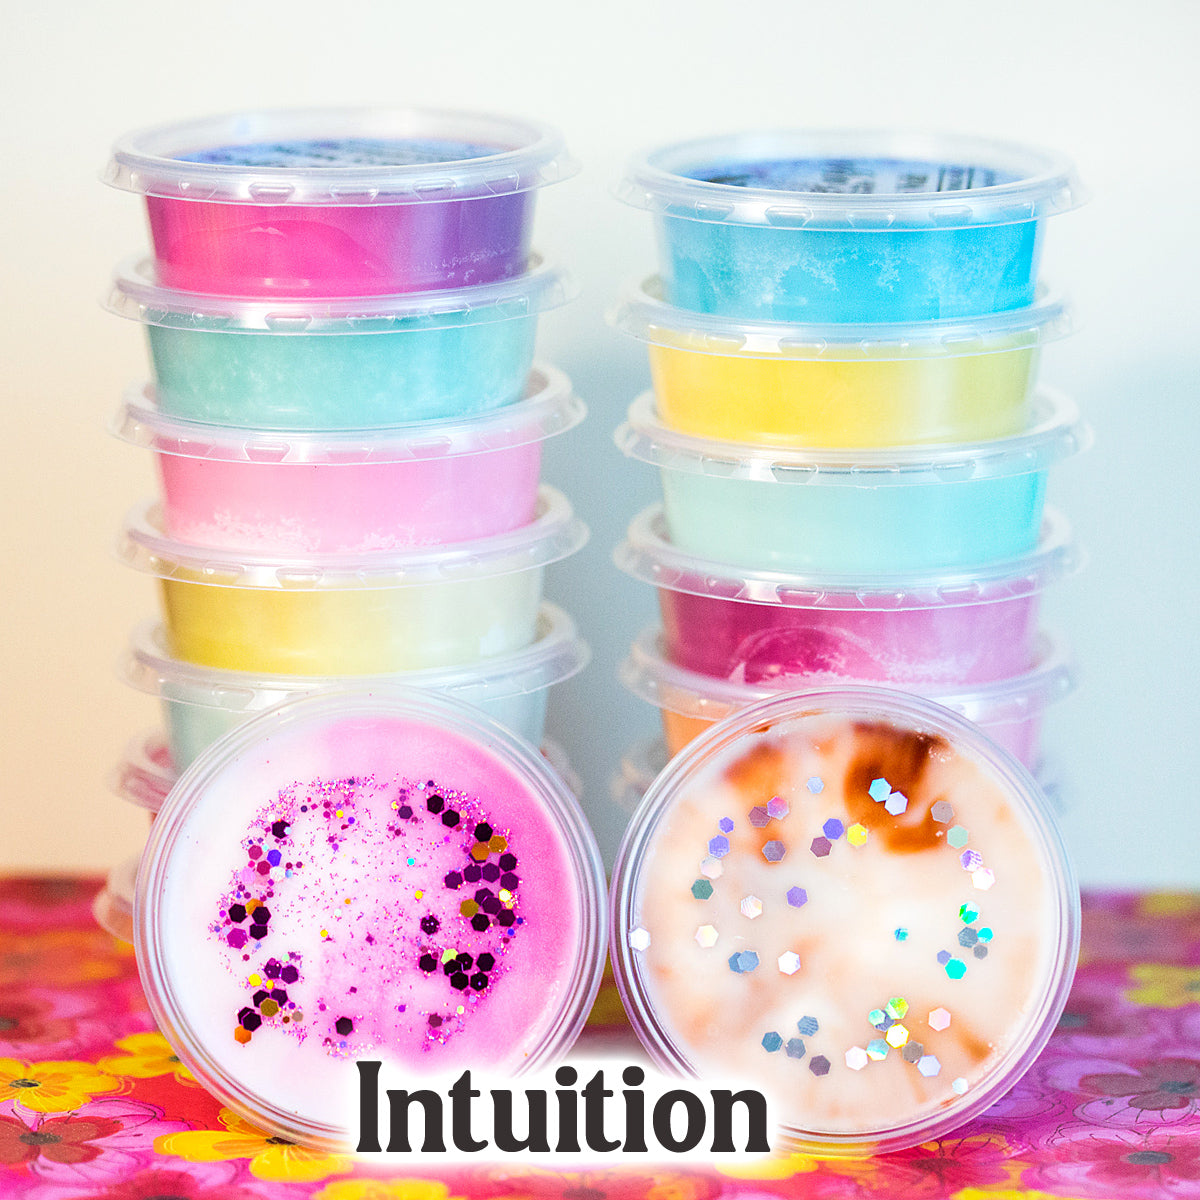 Intuition - Wachs Melt Scent Cup